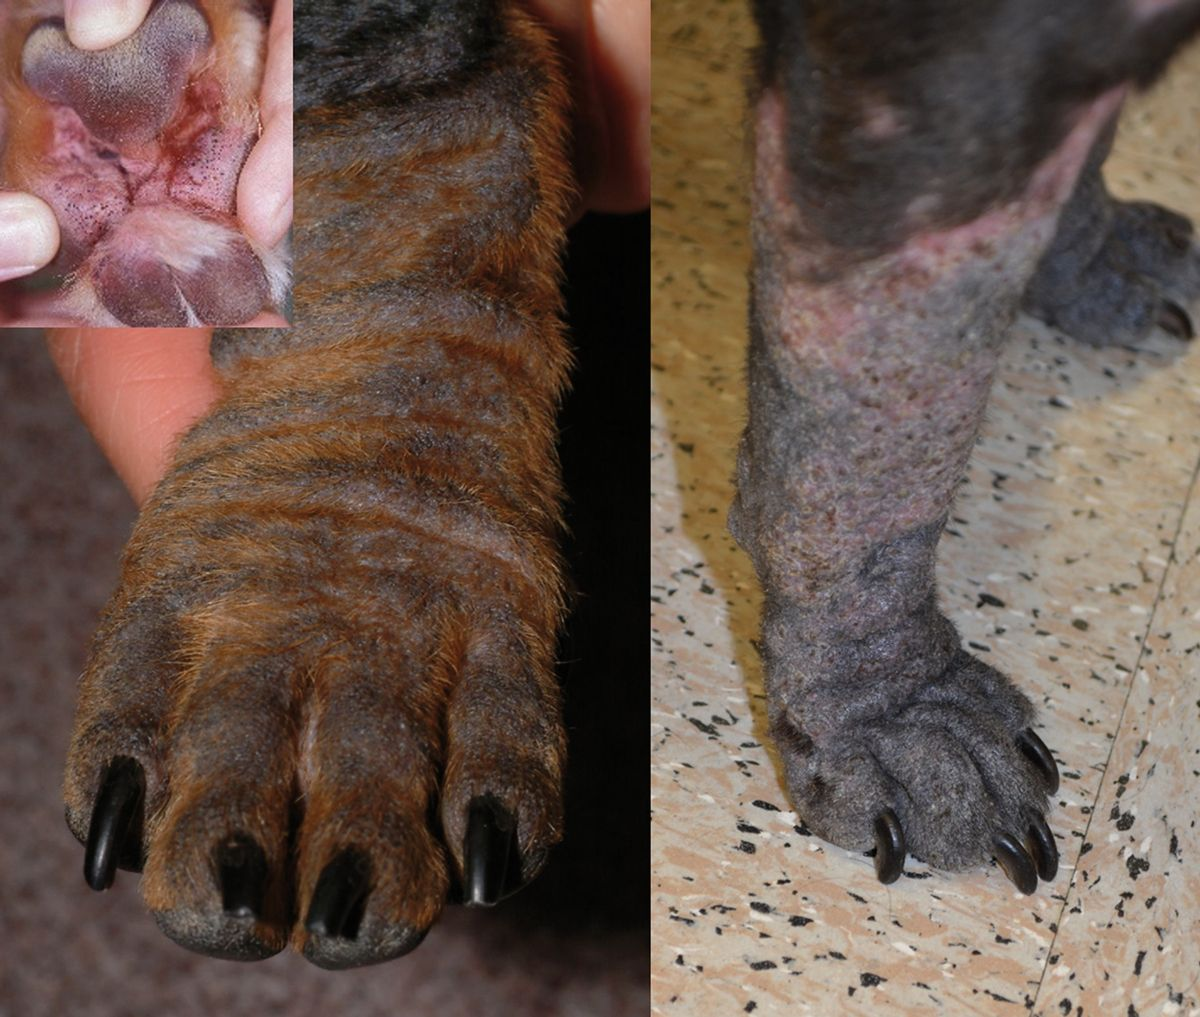 Figue 6. Many dogs with demodicosis develop comedones, with a characteristic gray discoloration. © Rosanna Marsella